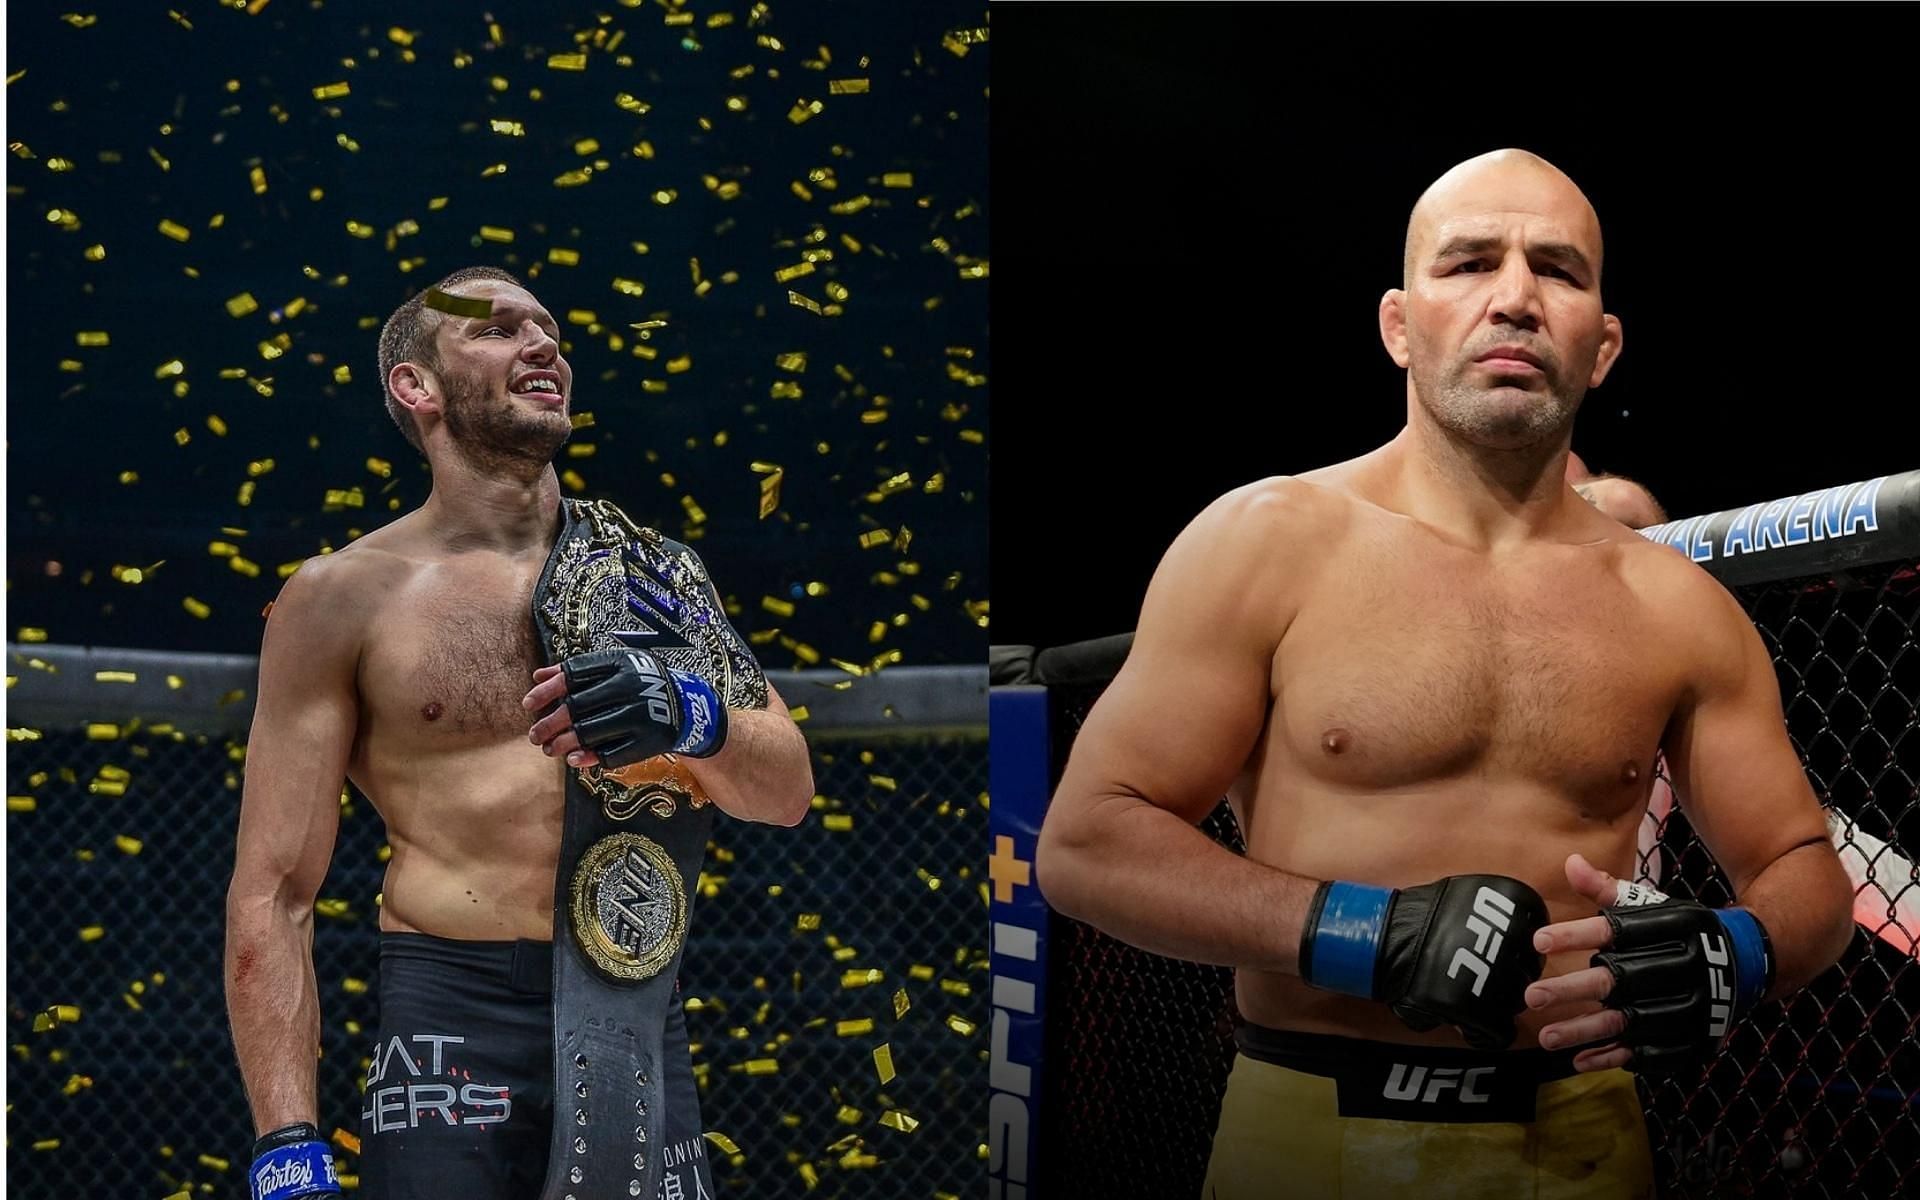 ONE Championship middleweight and light heavyweight champion Reinier de Ridder (left) could give newly crowned UFC light heavyweight champion Glover Teixeira (right) a run for his money. (Images courtesy of ONE Championship and UFC)